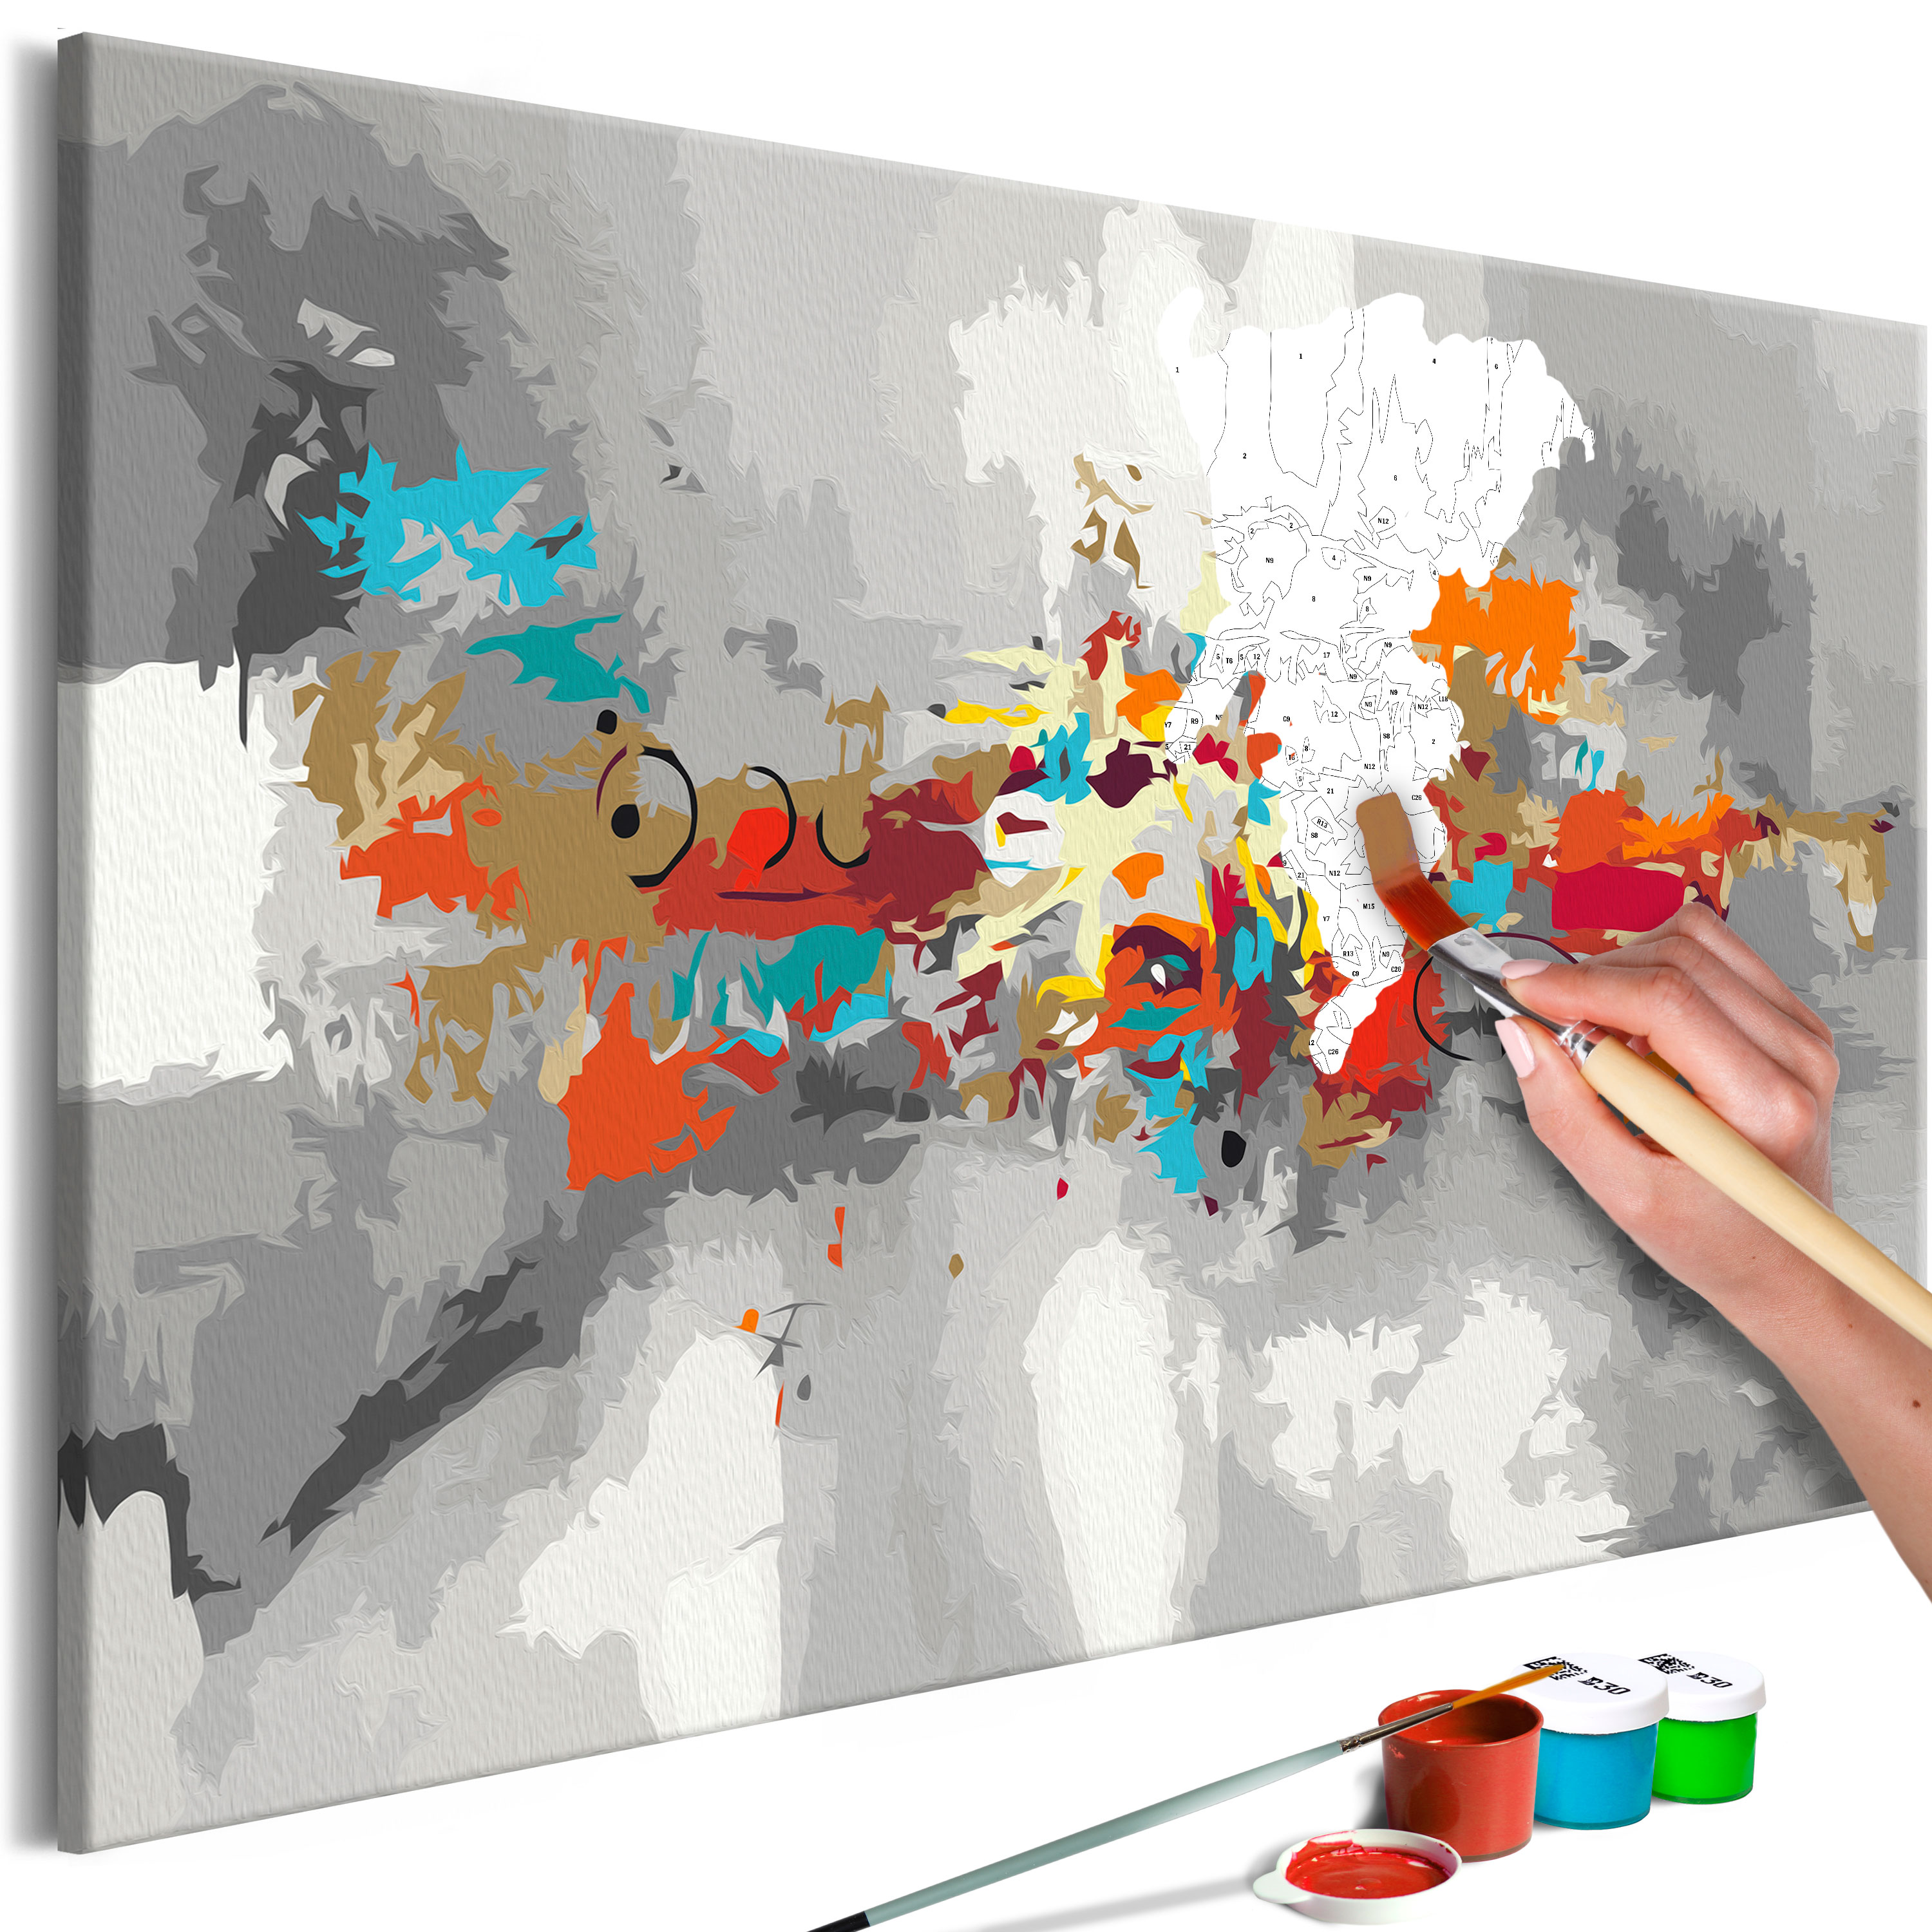 DIY canvas painting - Artistic Disorder - 60x40